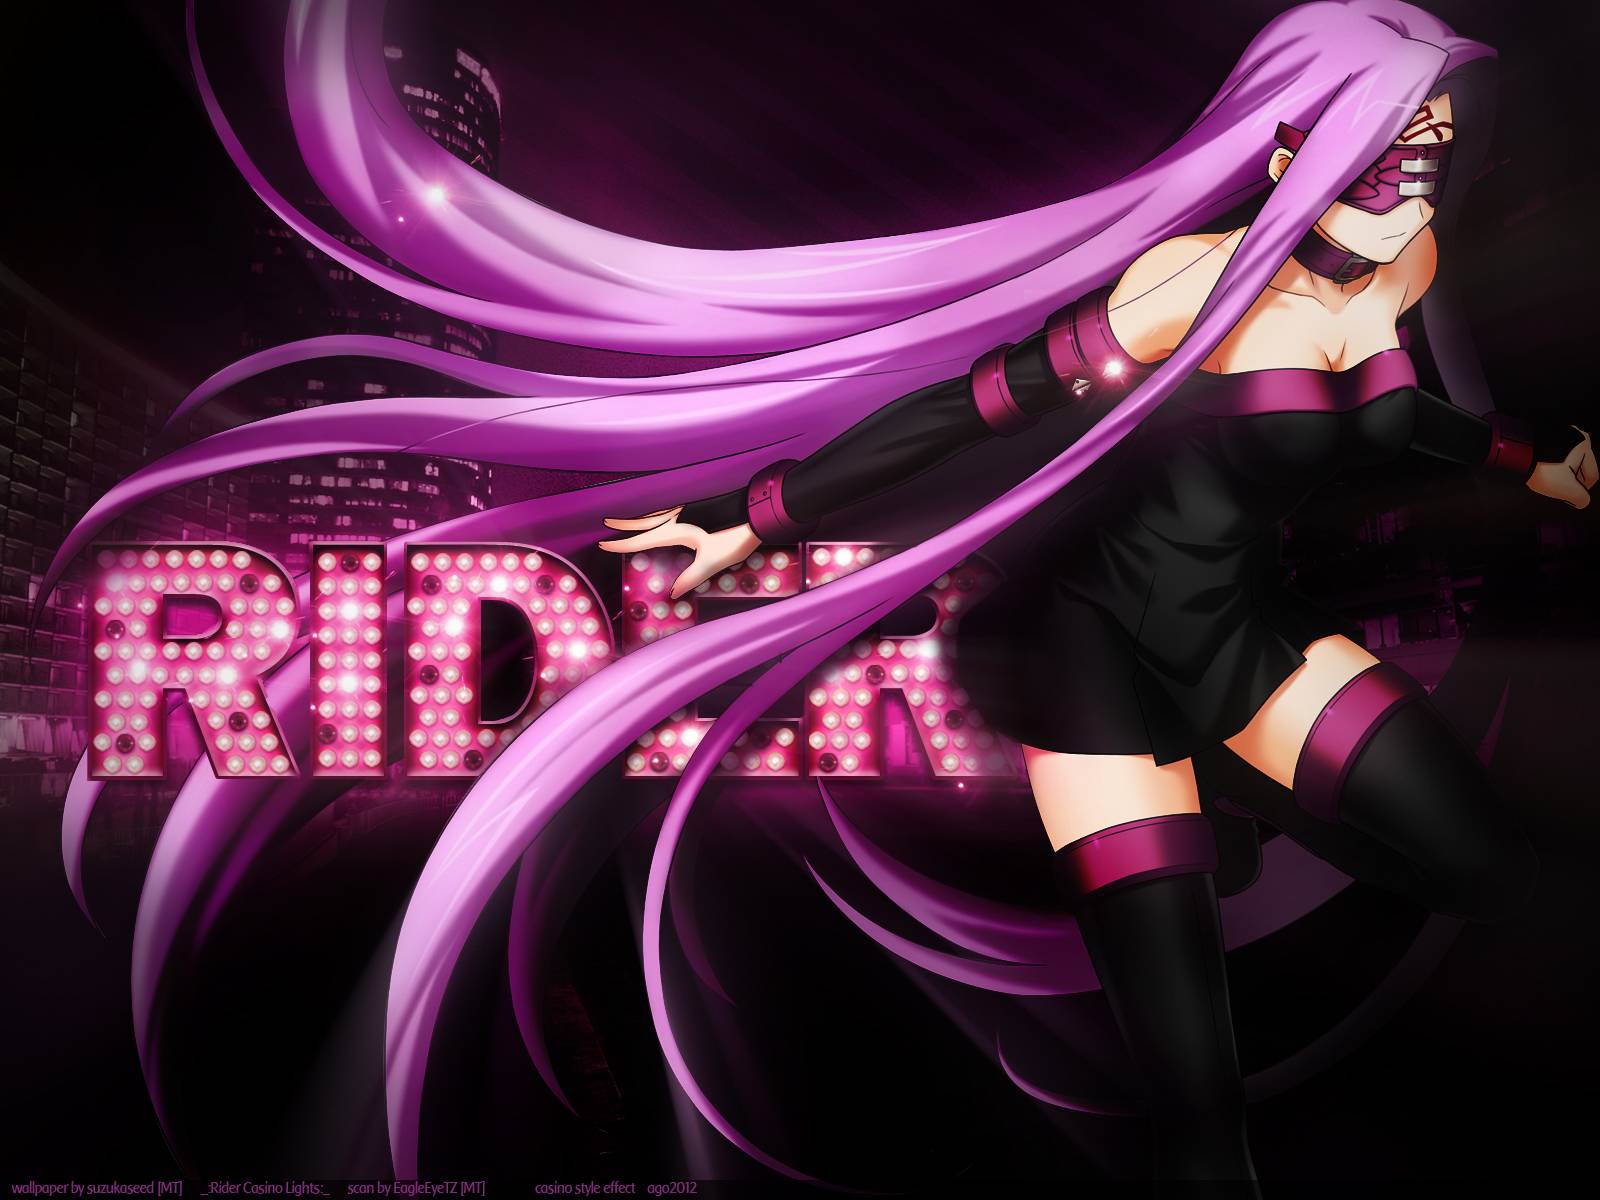 Rider Black and pink wallpaper of Rider from Fate Stay Night